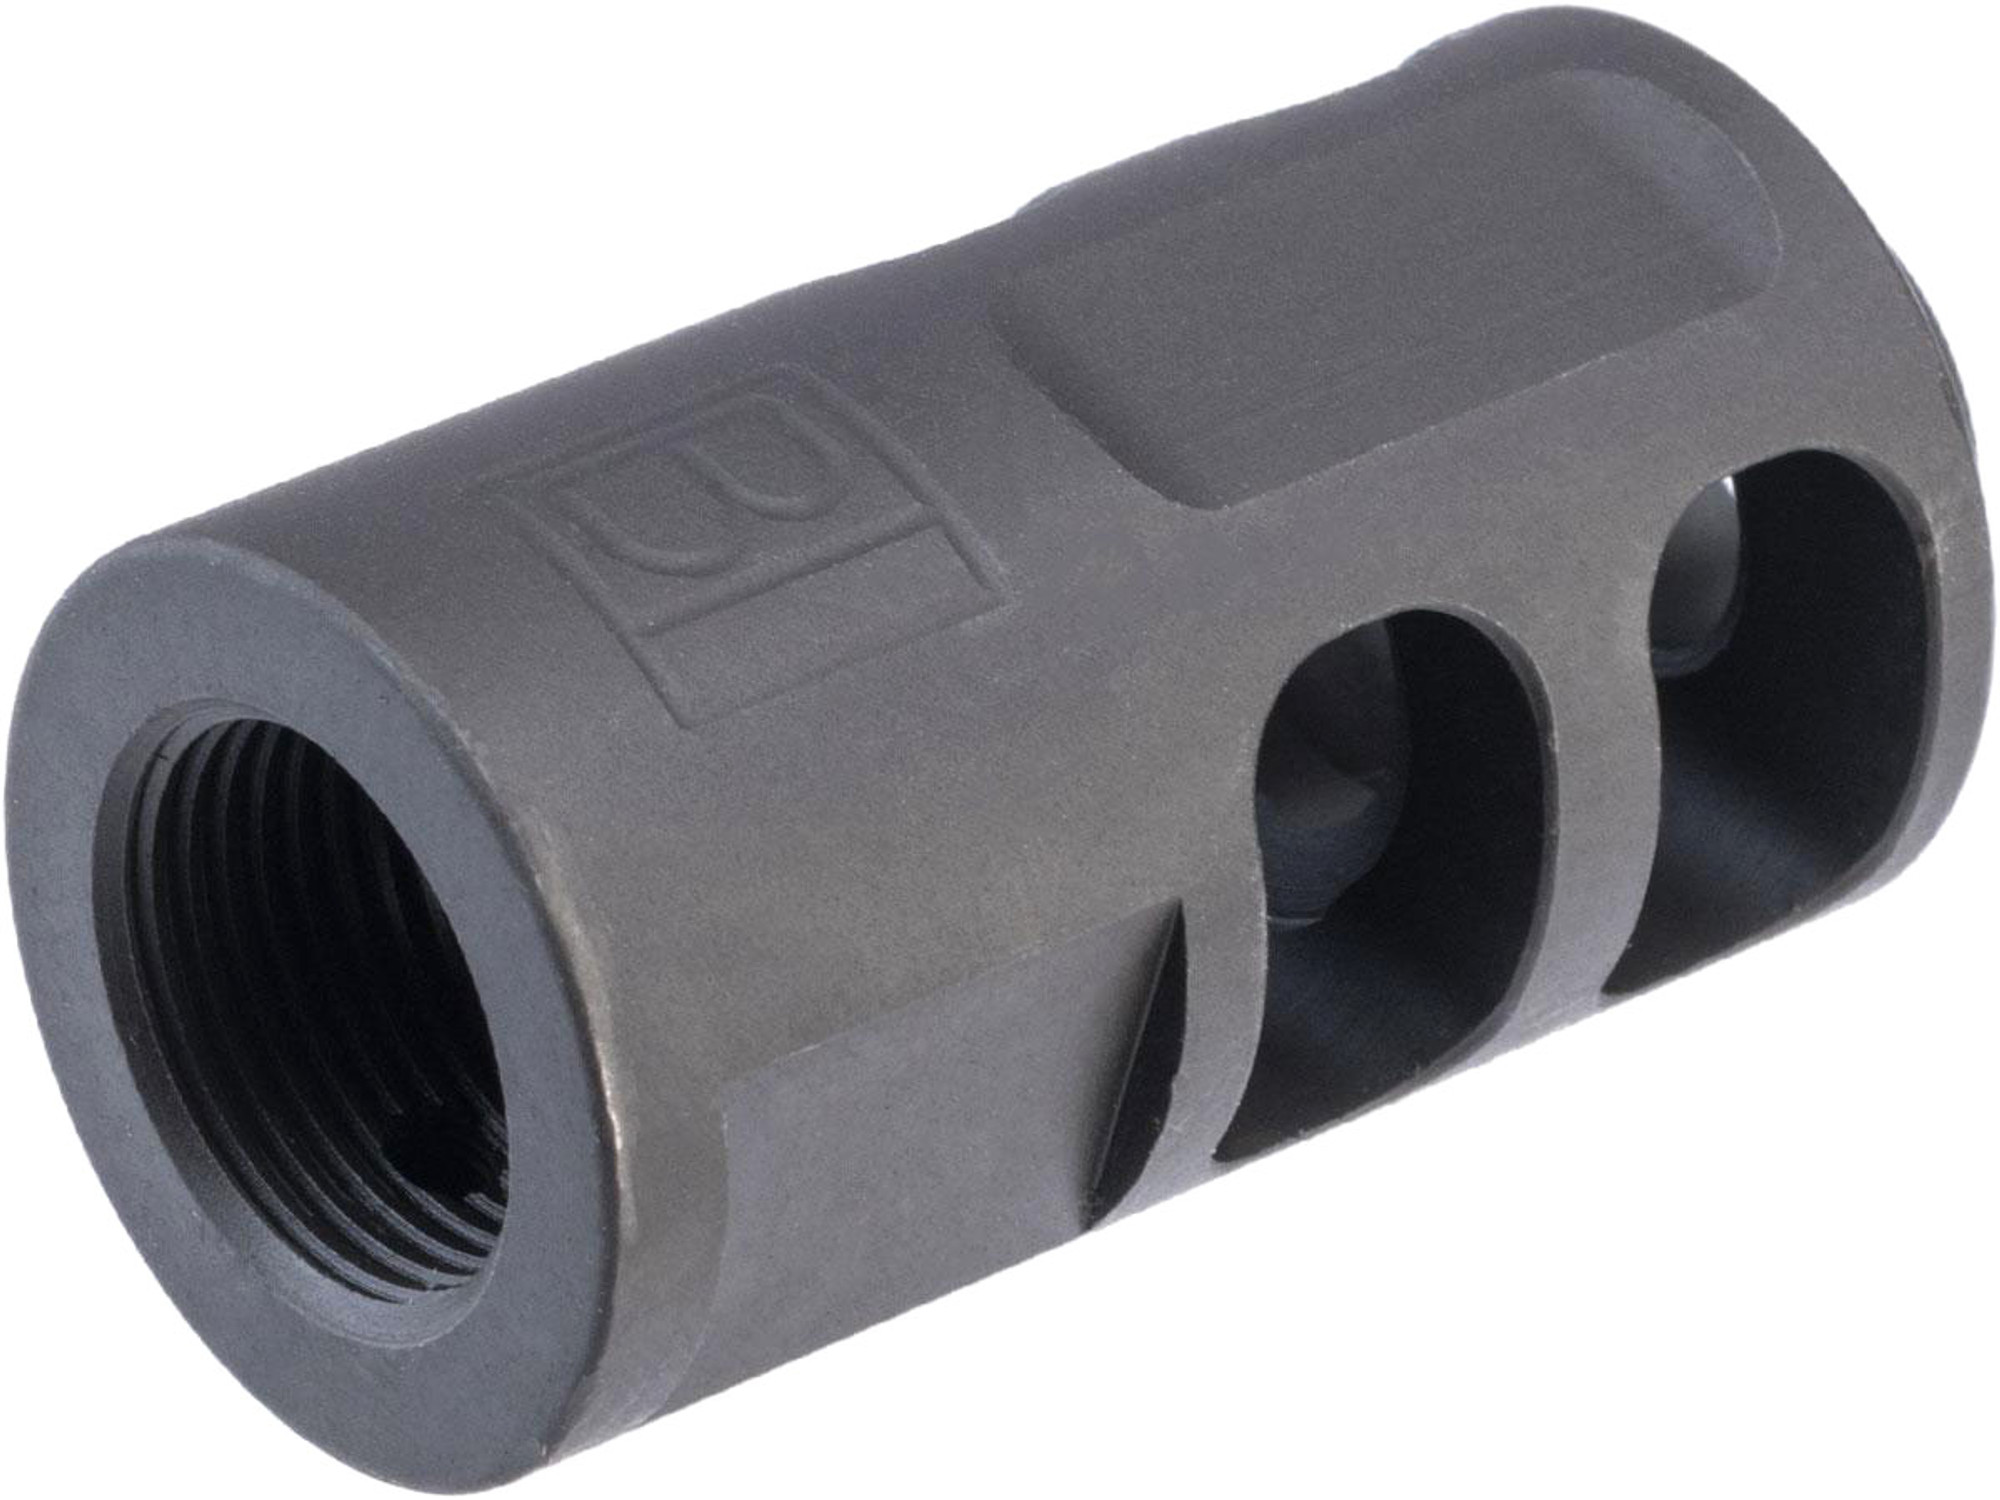 Krytac / BARRETT Firearms Licensed REC7 Muzzle Brake Assembly for M4/M16 Airsoft Rifles